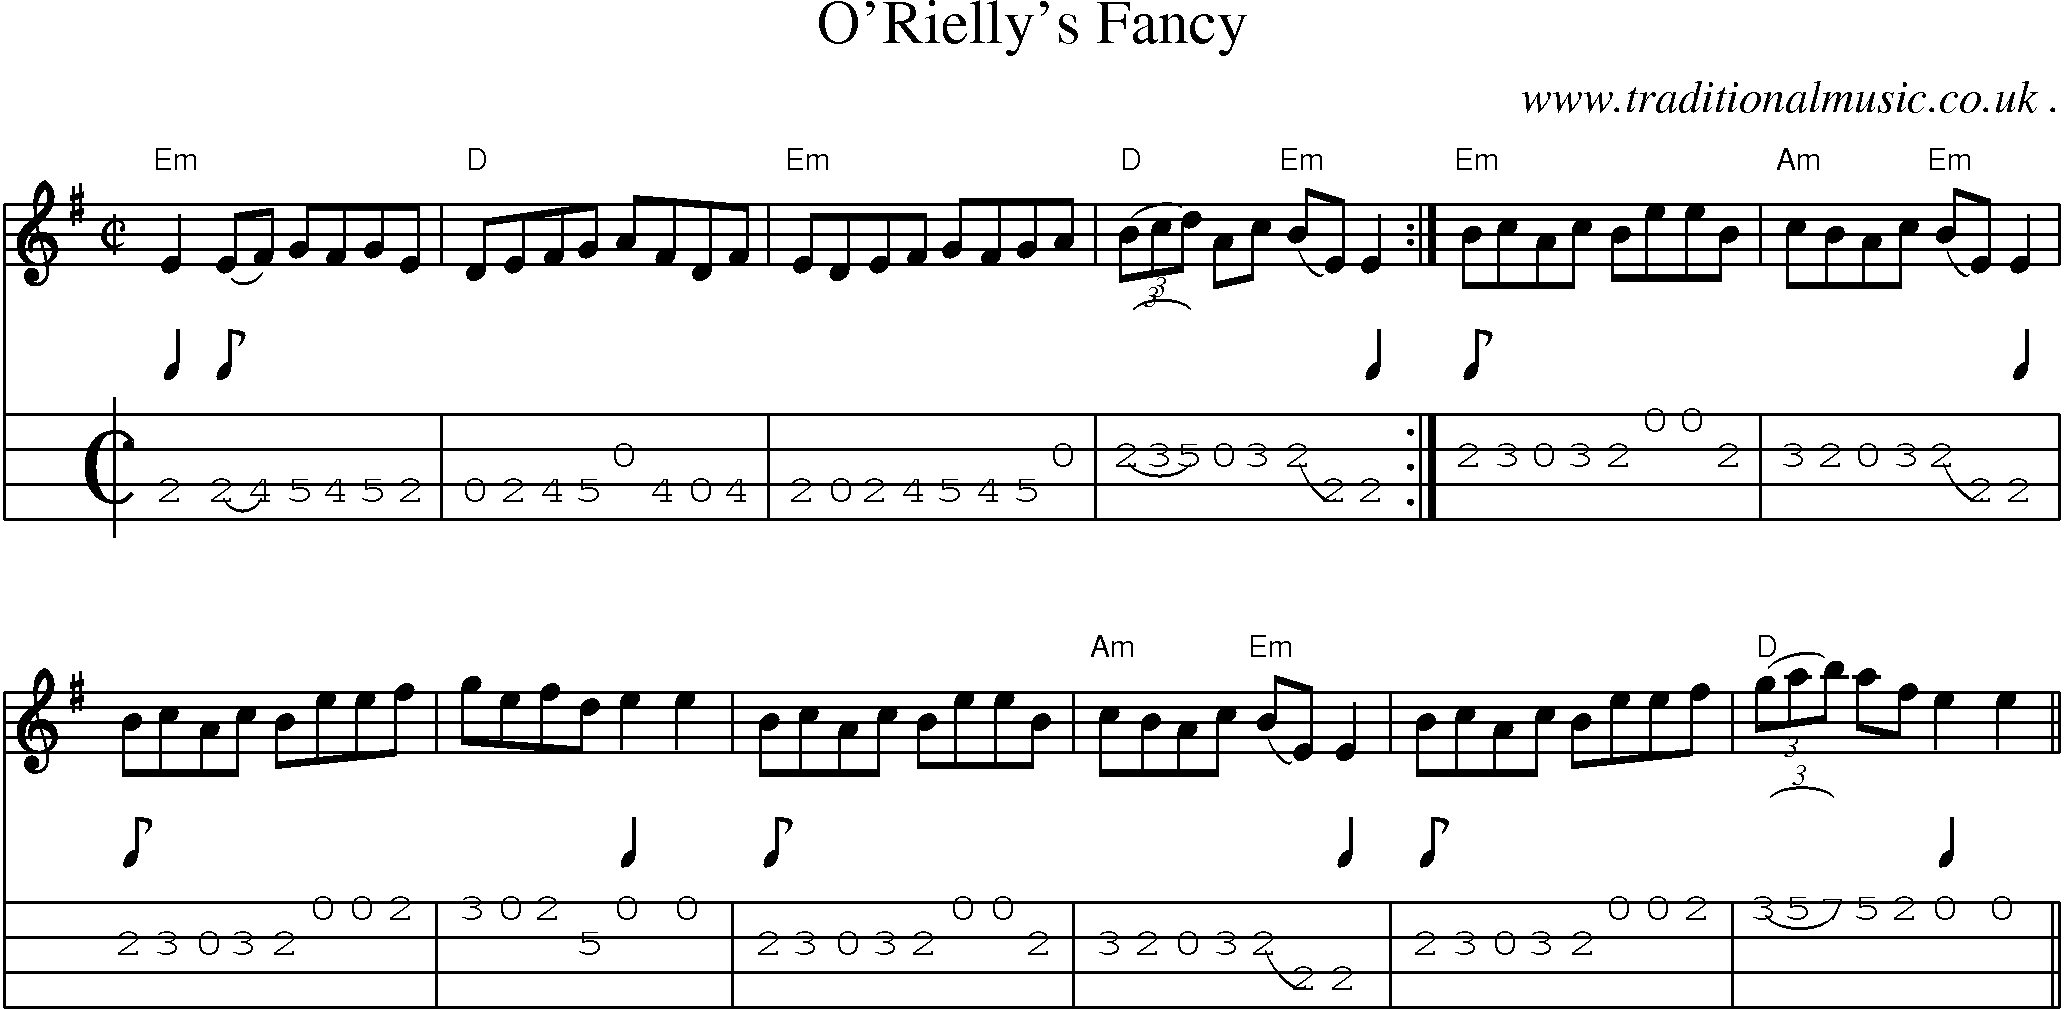 Music Score and Guitar Tabs for Oriellys Fancy